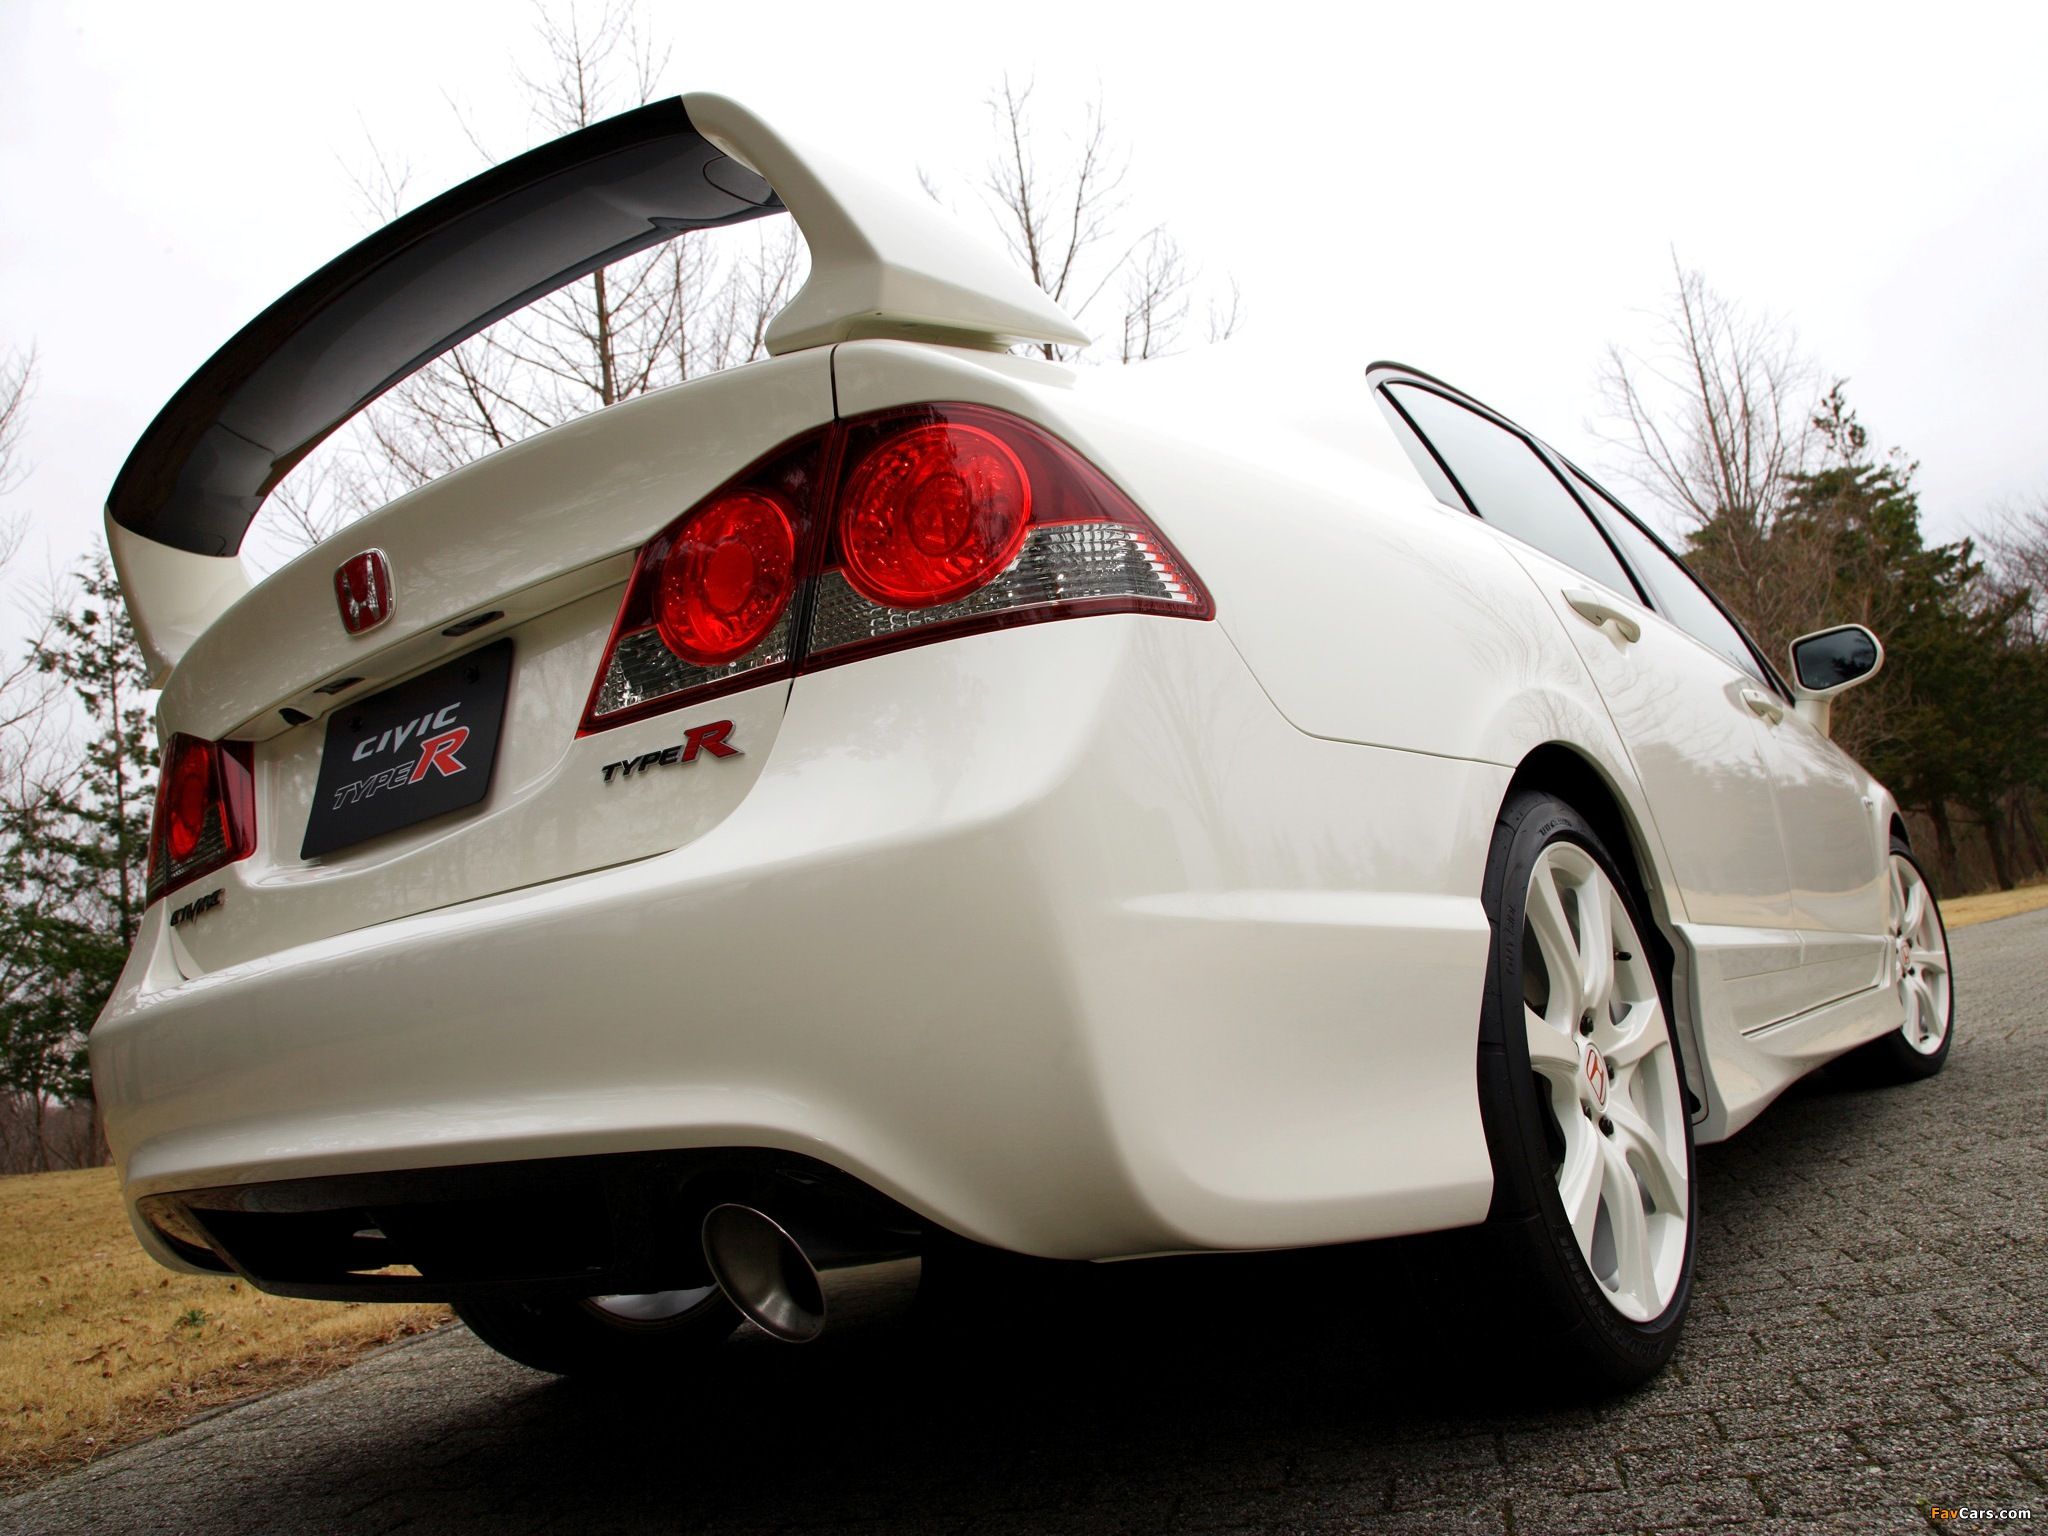 A Weekend With: Honda Civic Type R FD2R